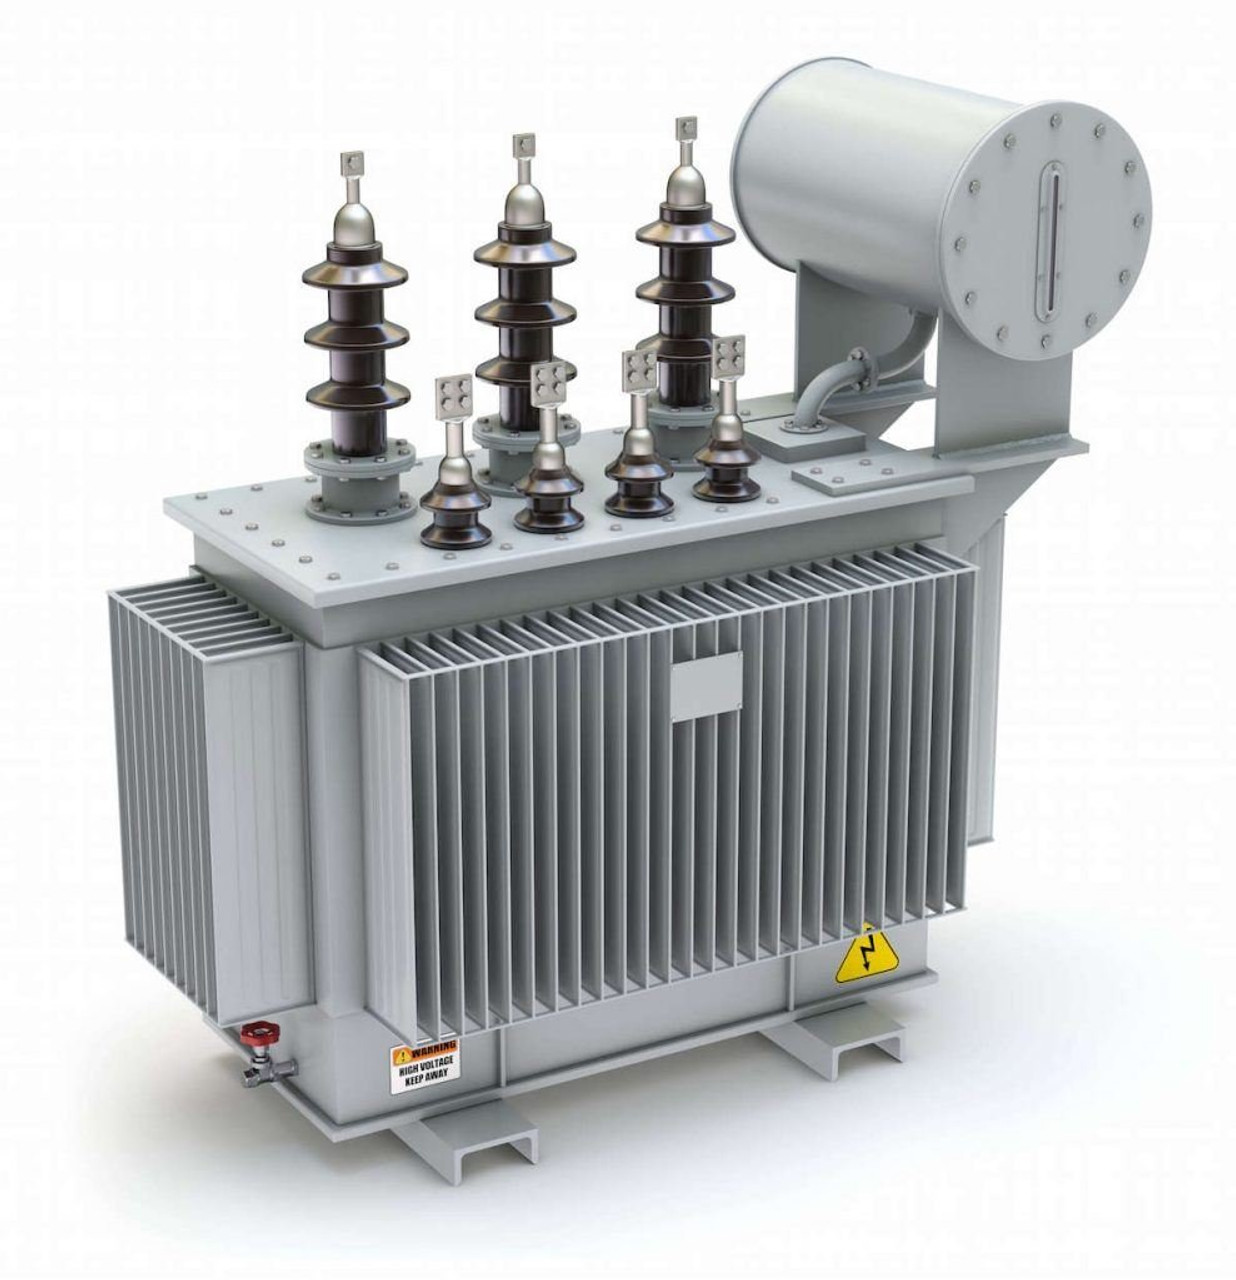 High-voltage transformer manufacturers tell you the purpose